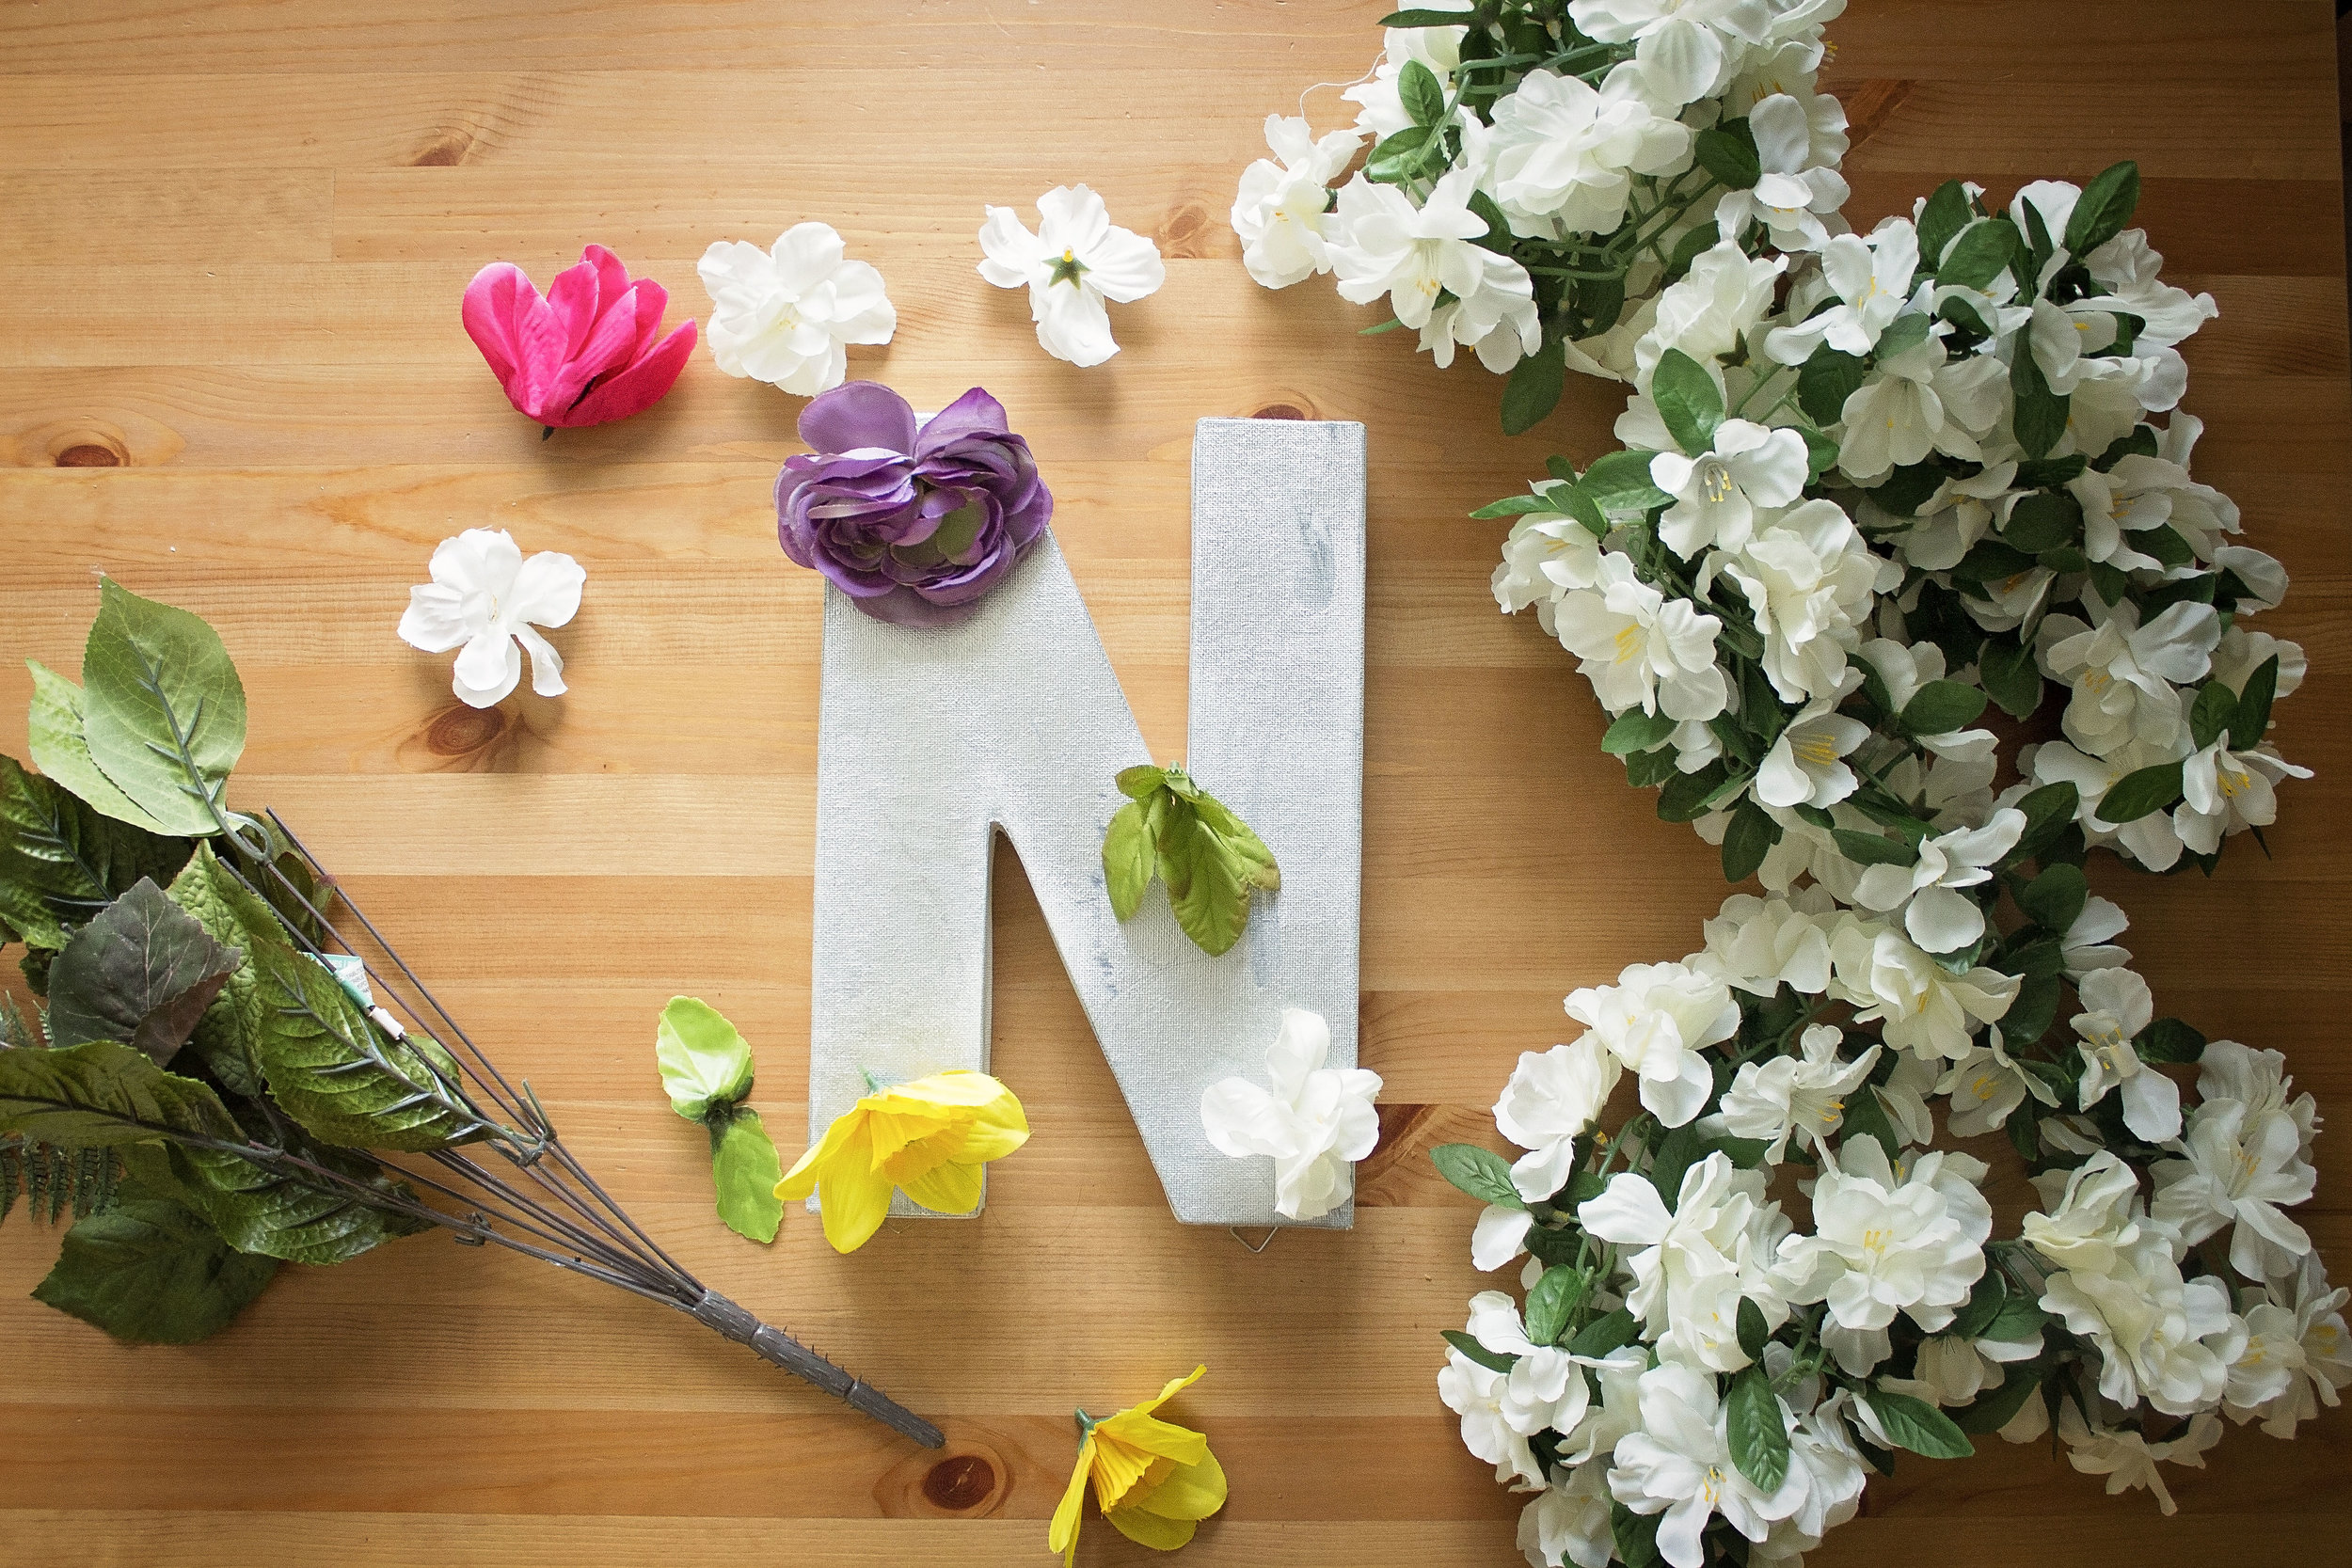 diy-d-i-y-floral-letters-photography-props-1st-birthday-ideas-crafts-so-cal-photographer-cost-effective-props-photography